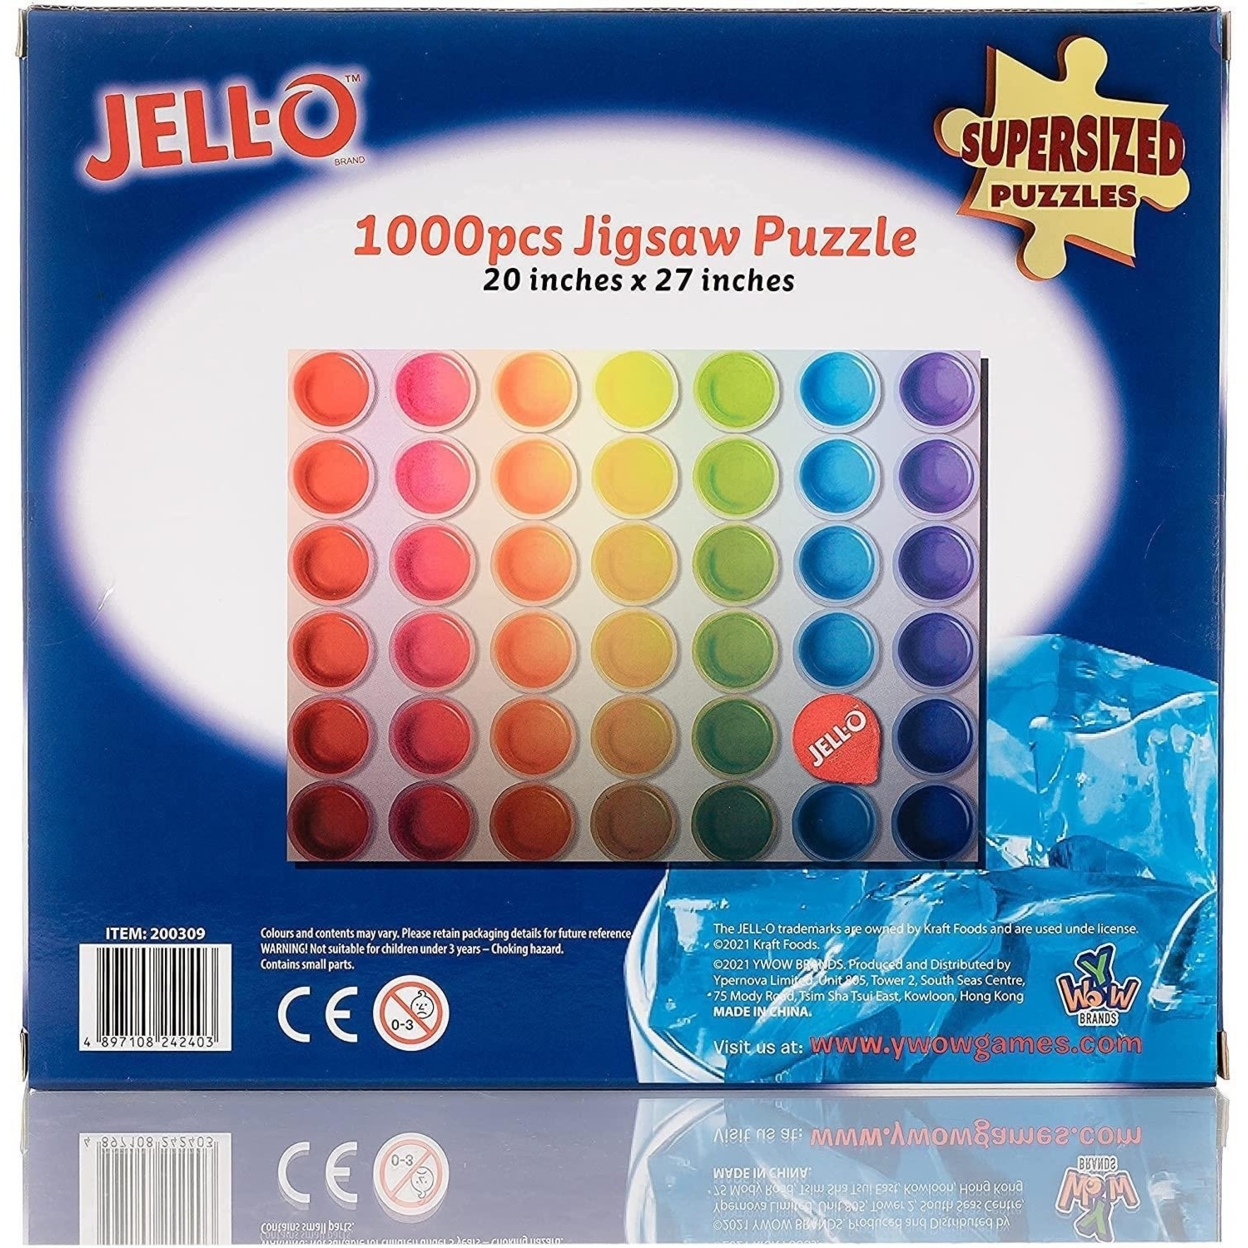 Jell-O 1000 Piece SuperSized Jigsaw Puzzle Giant 20x27 Rainbow Colors YWOW Games